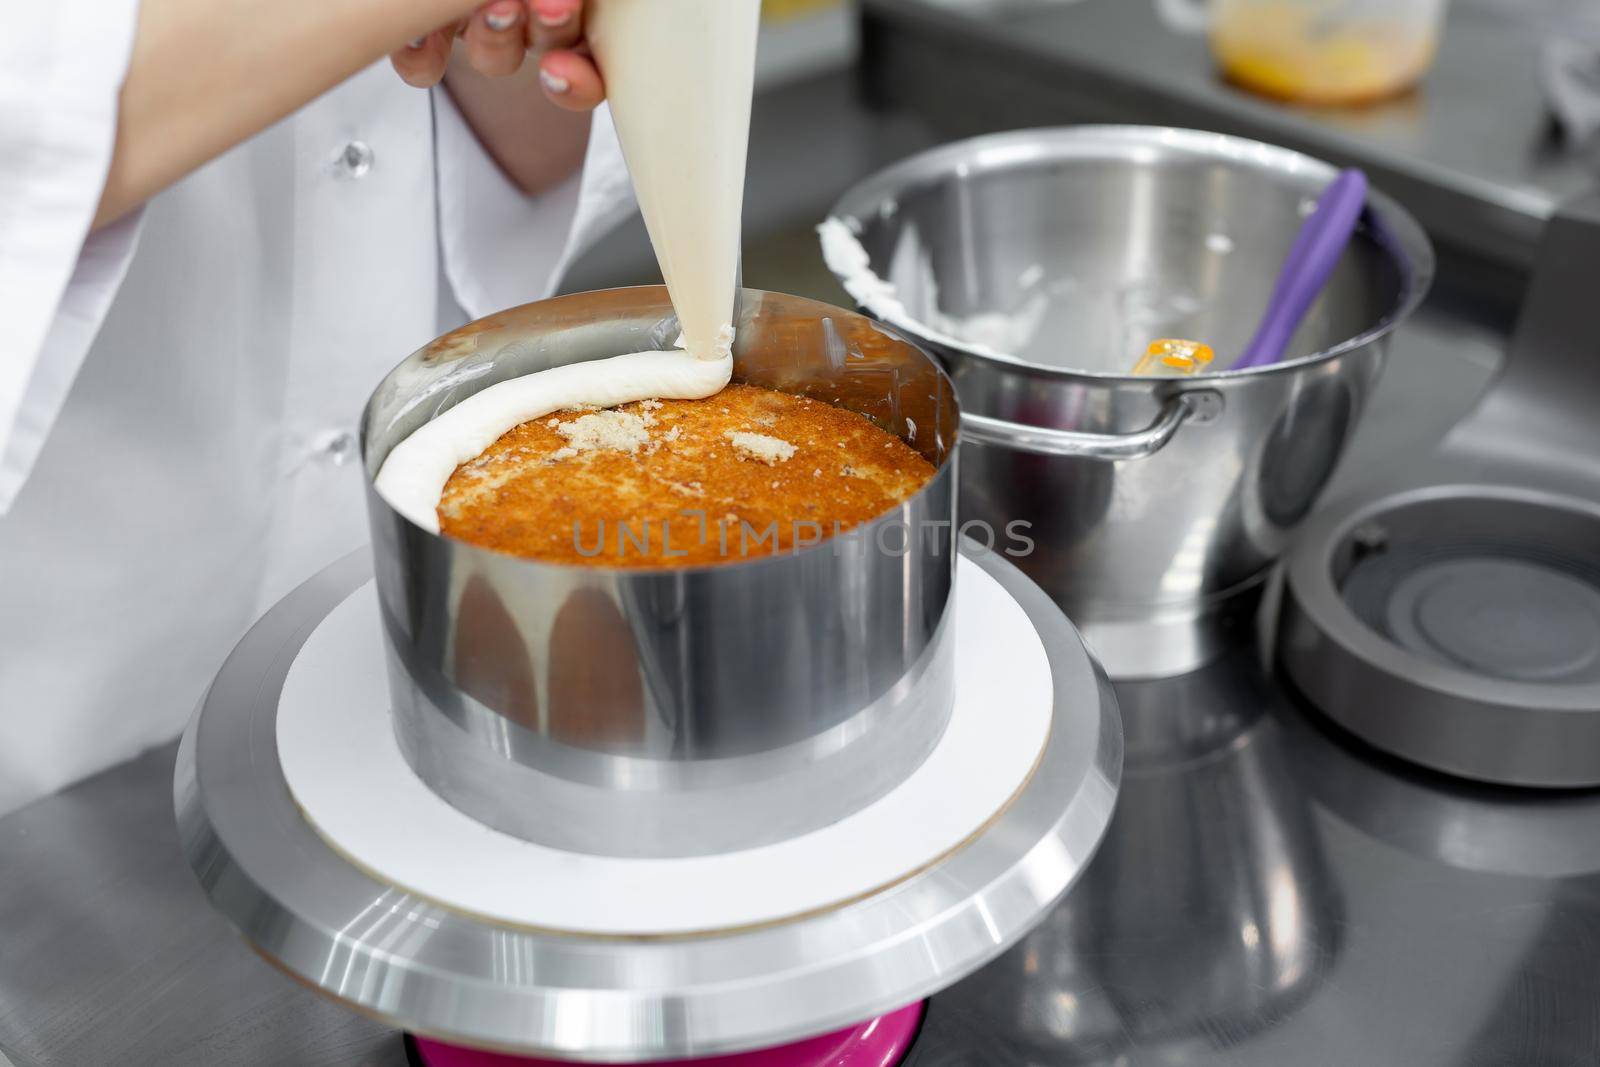 Confectioner apply cream from a pastry bag to the cake by StudioPeace